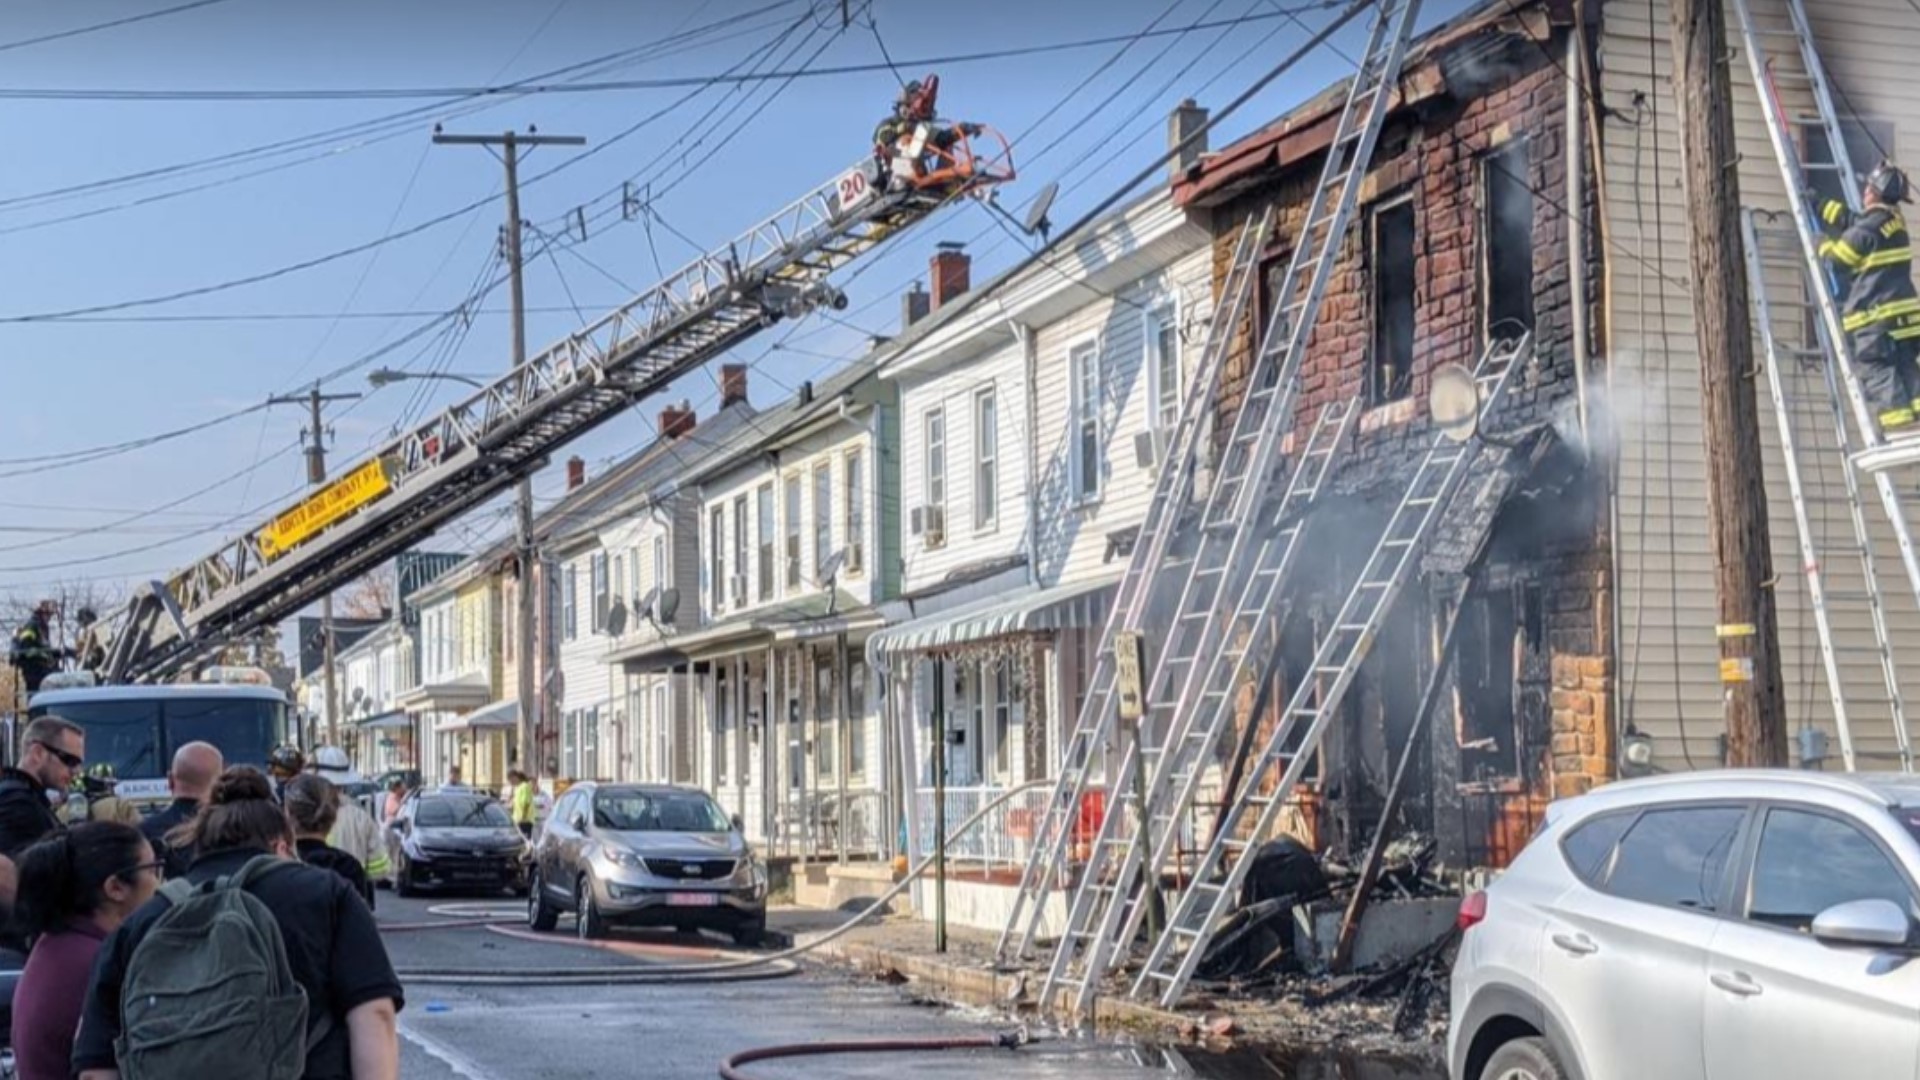 The fire was reported at a home along the 200 block of Mifflin Street in the city shortly before 11 a.m.